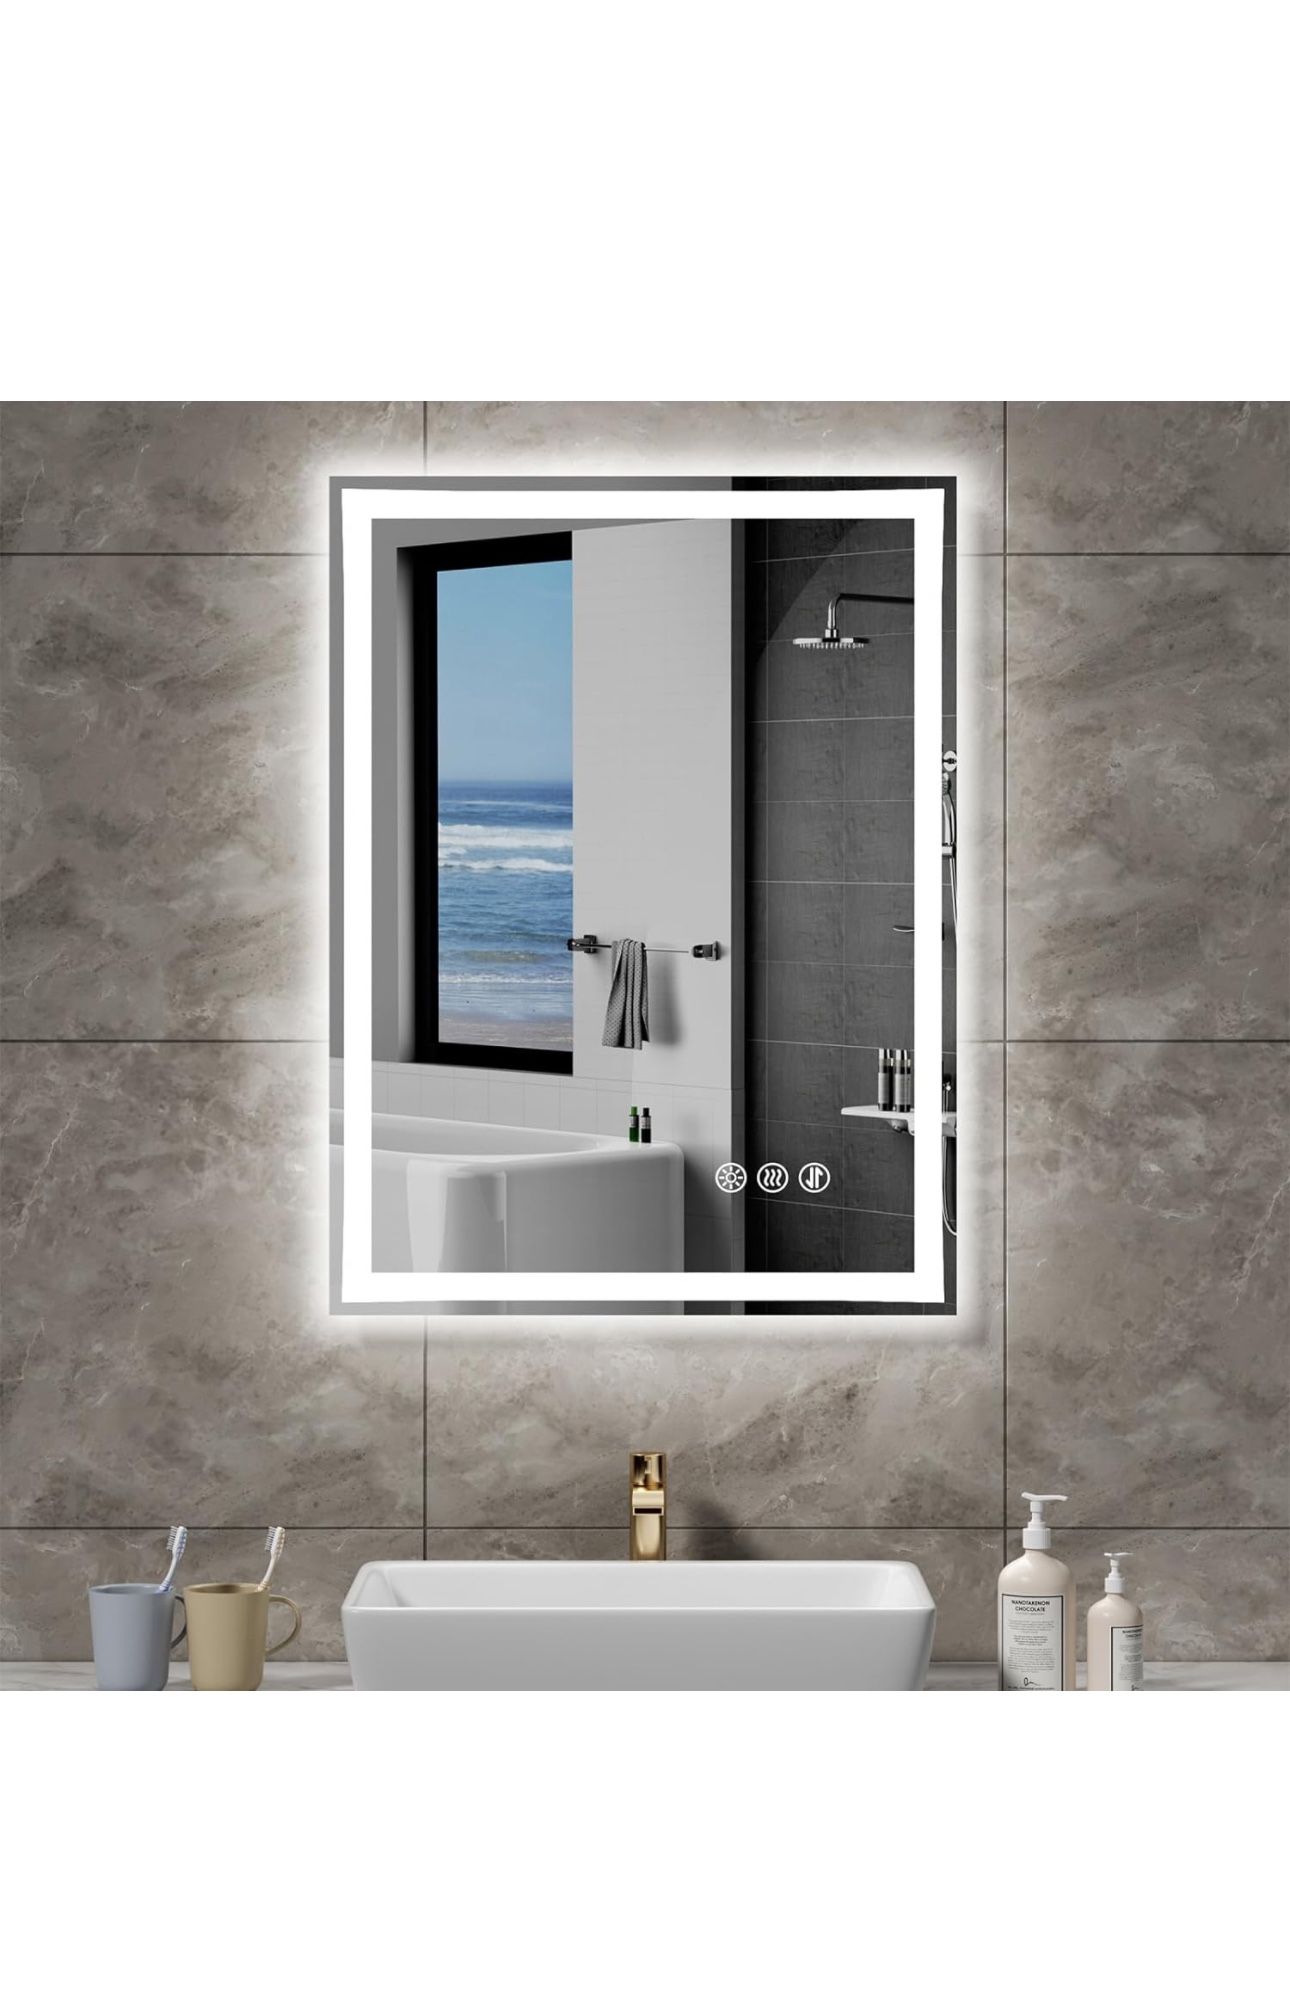 20x28 Inch LED Mirror Bathroom Vanity Mirrors, Wall Mounted LED Makeup Mirror with Anti-Fog, 3000-6000K Adjustable, Memory Dimmable Touch Switch (Vert